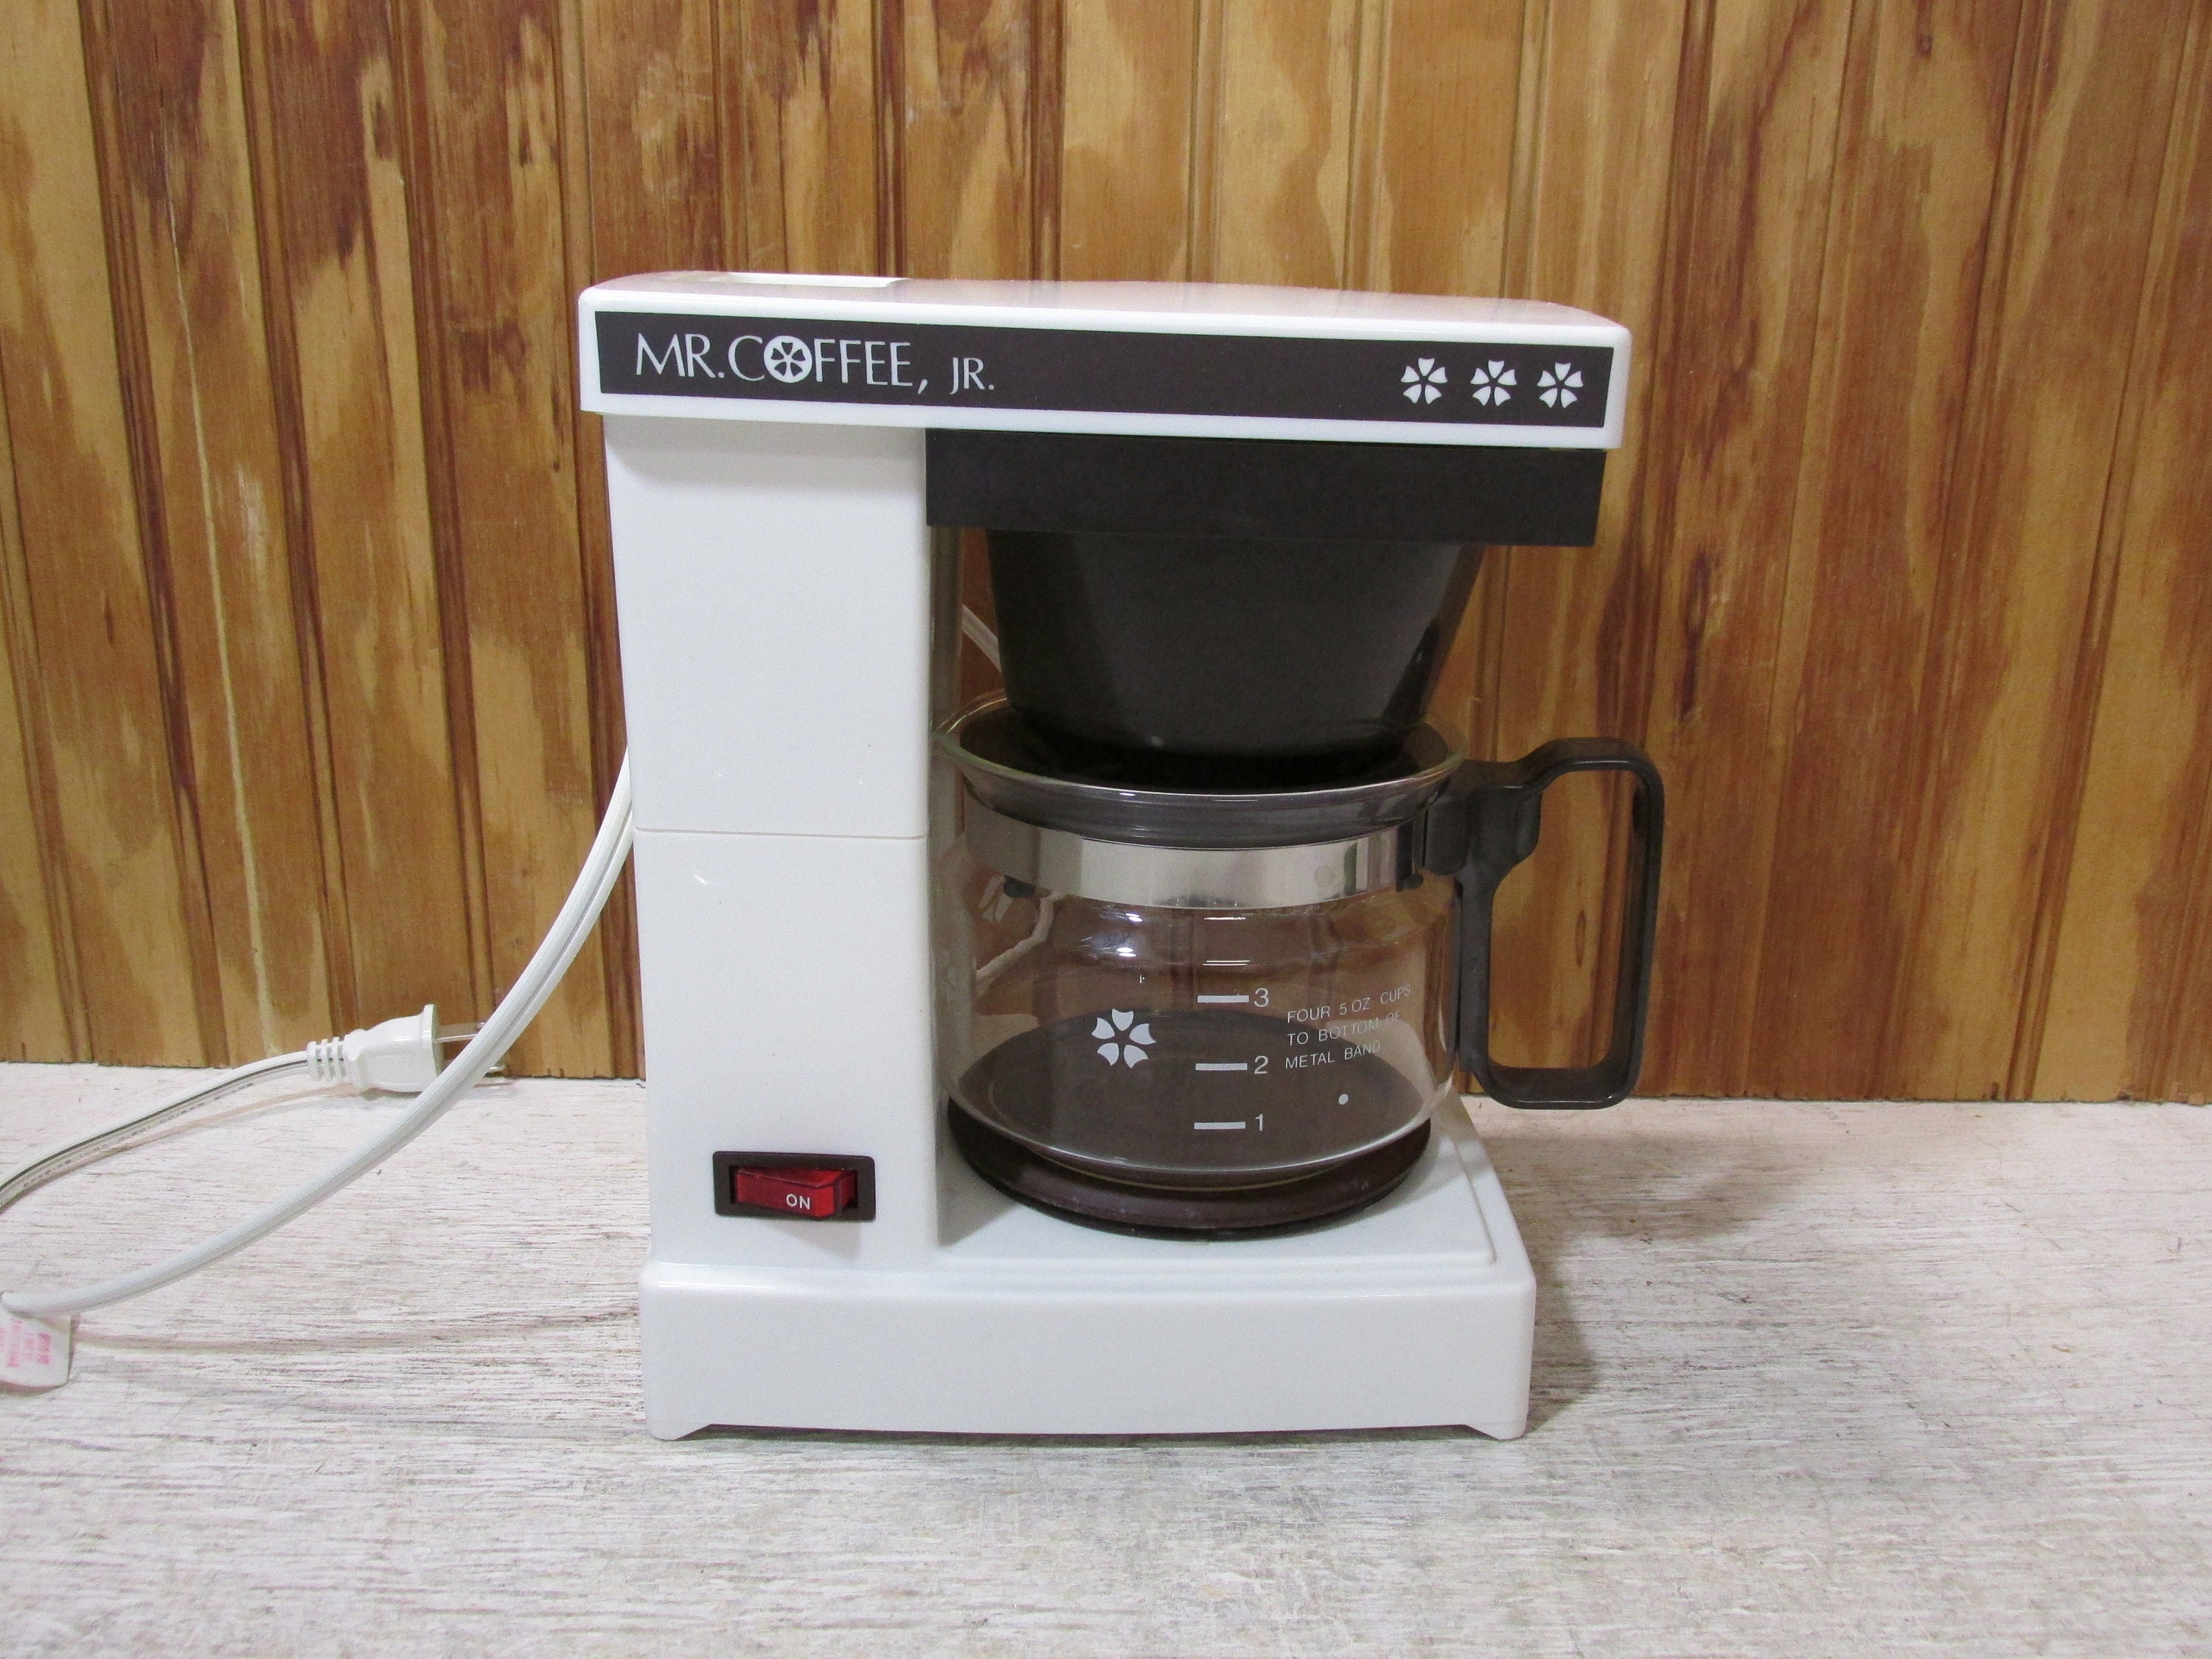 Best Selling Coffee Grinder  for the Price $30 (Mr coffee